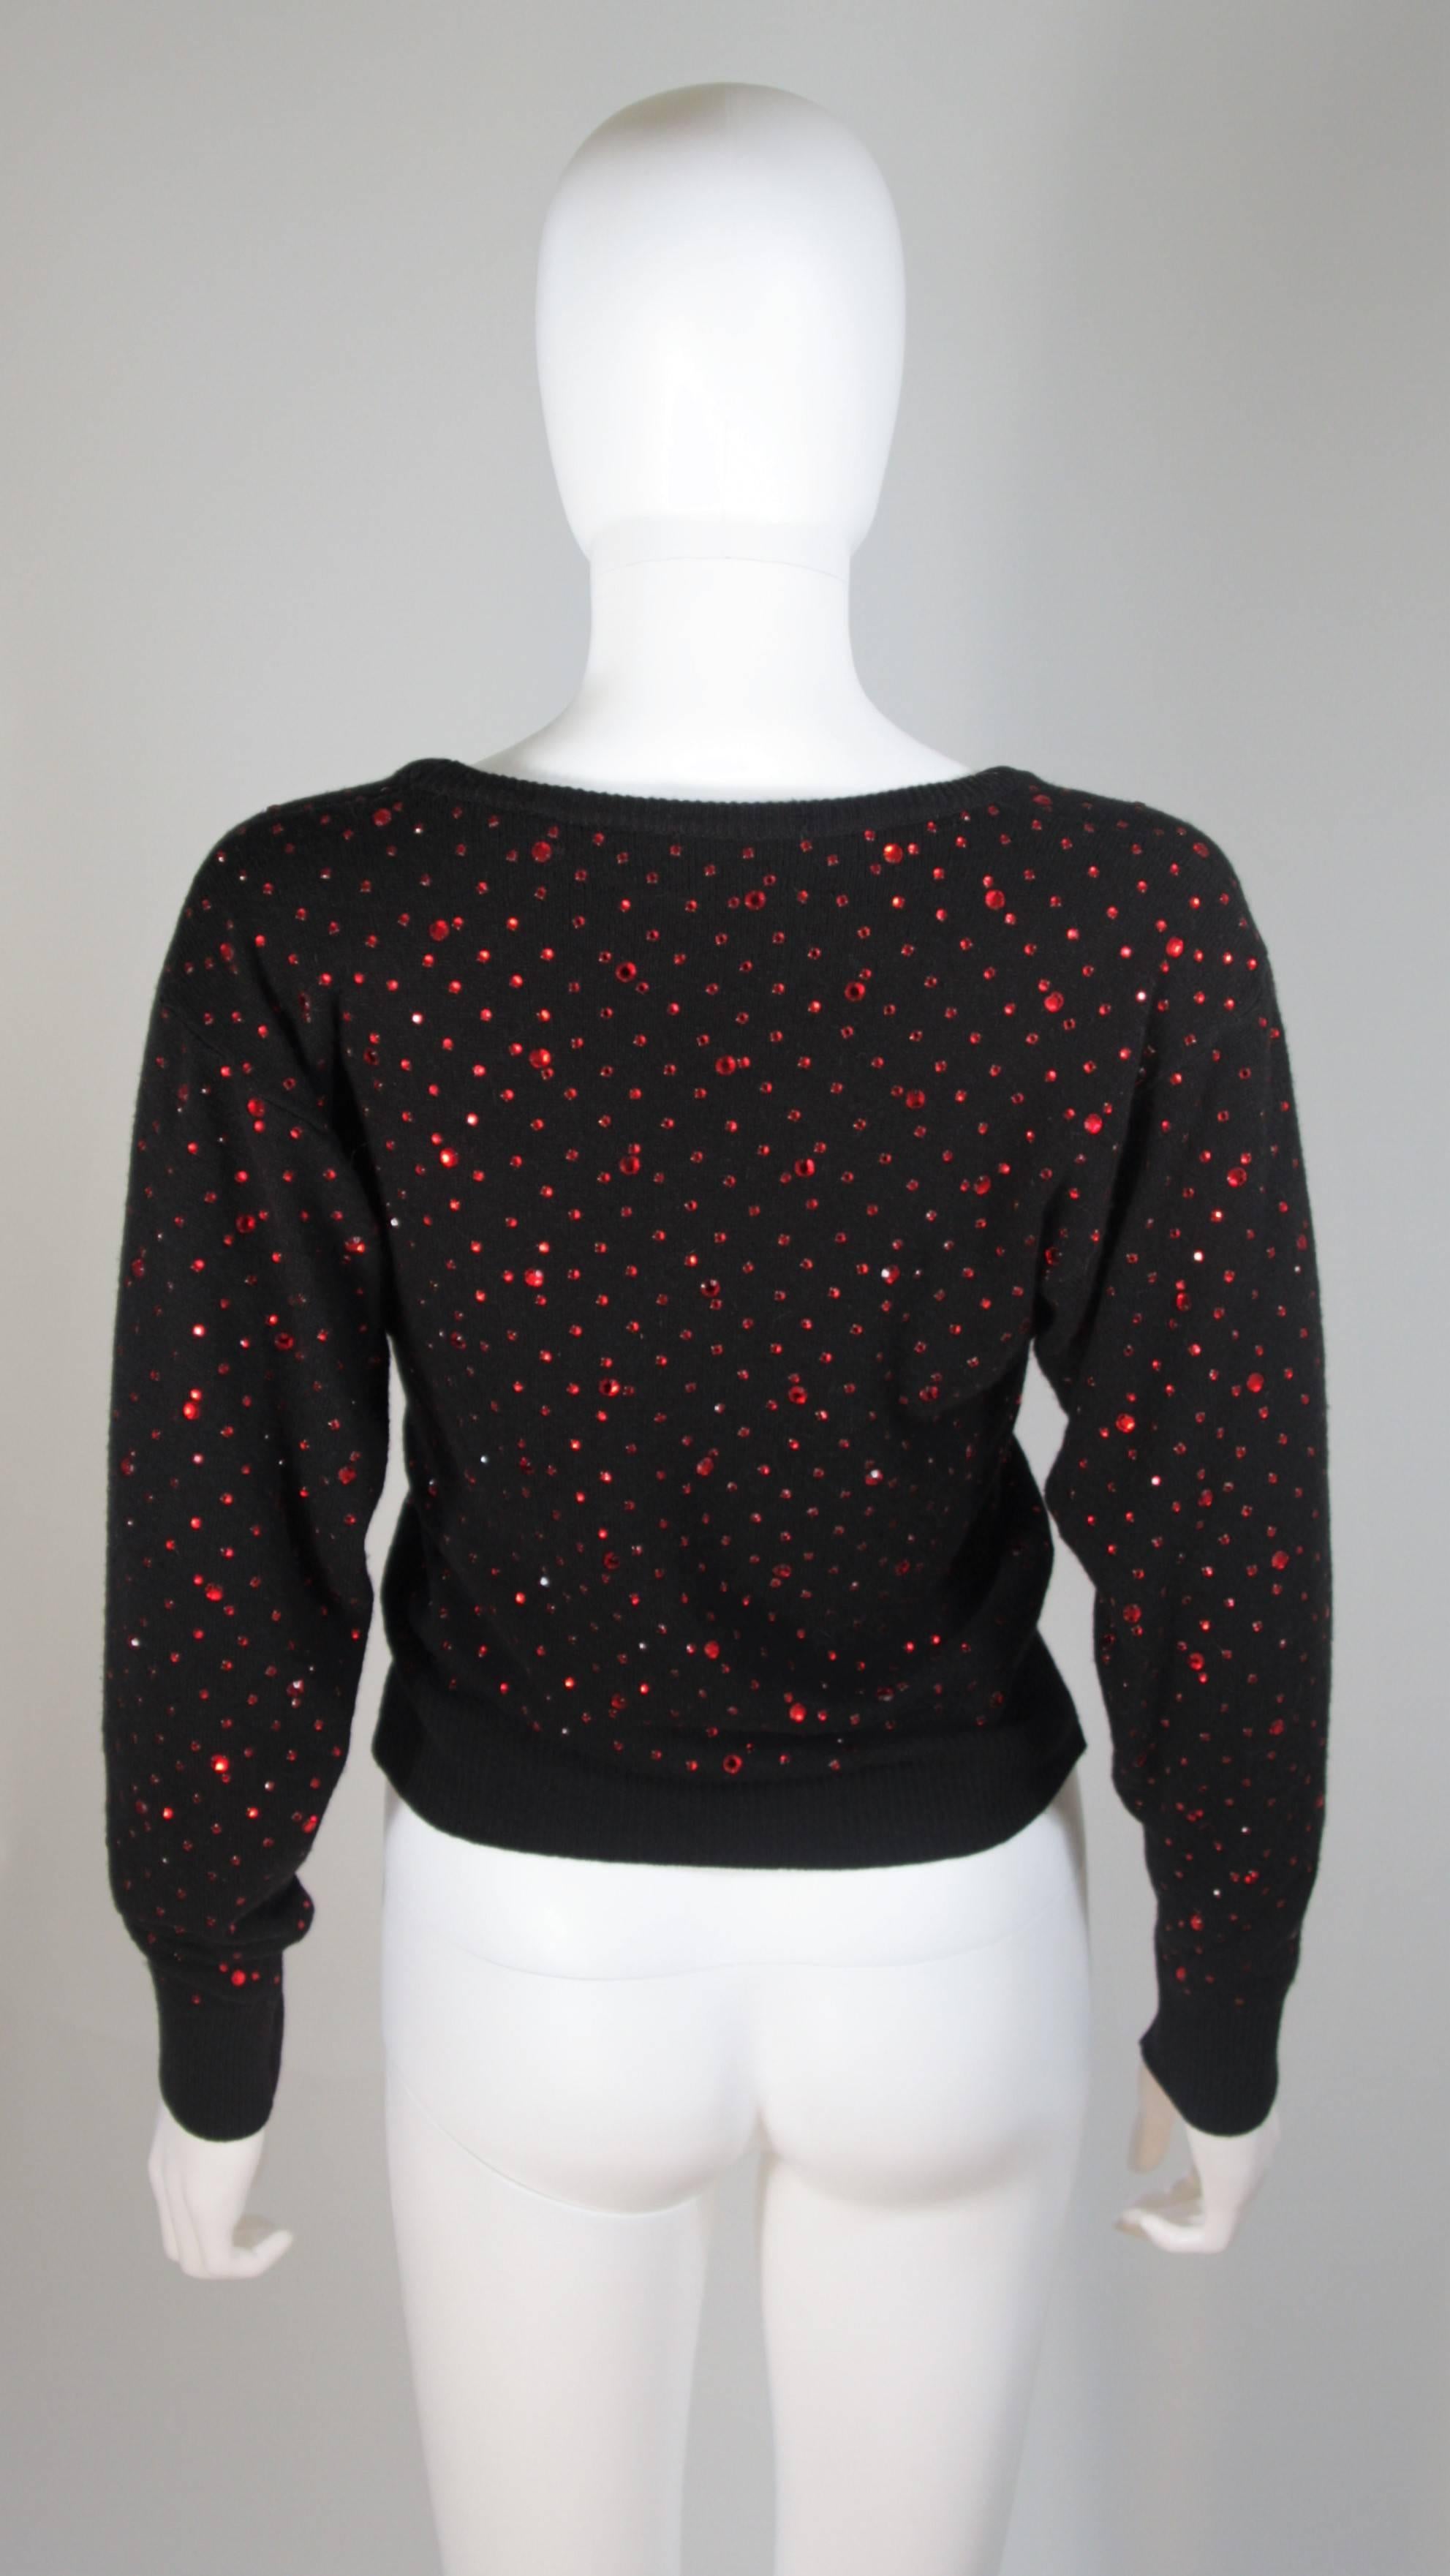 NEIMAN MARCUS Black Wool Knit Sweater with Red Rhinestone Applique Size M/L For Sale 1